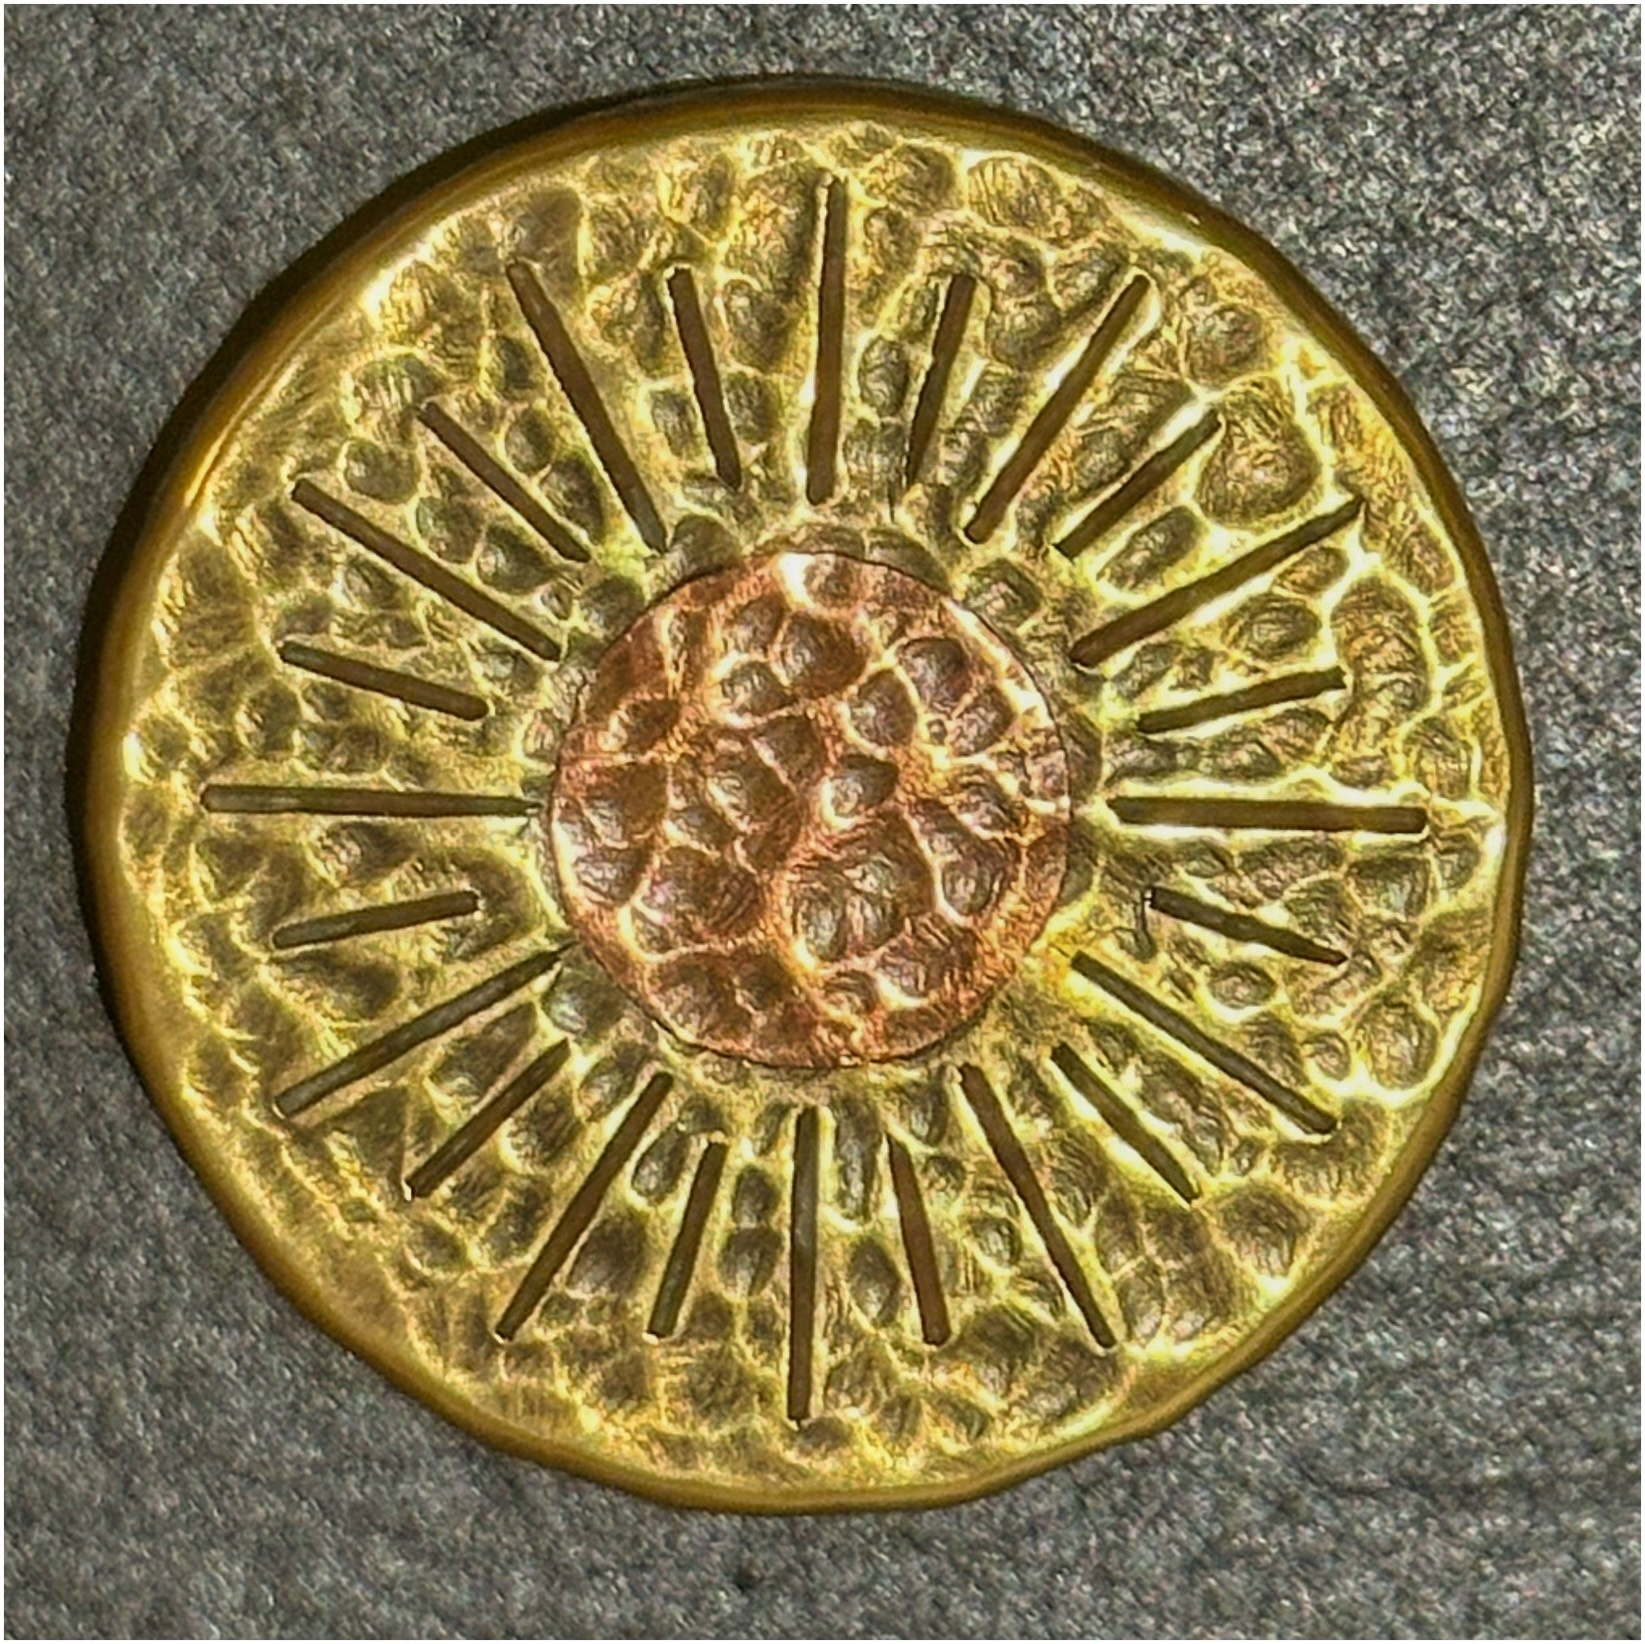 A close-up of a decorative, gold-colored round object with embossed radial patterns centered around a circular motif.